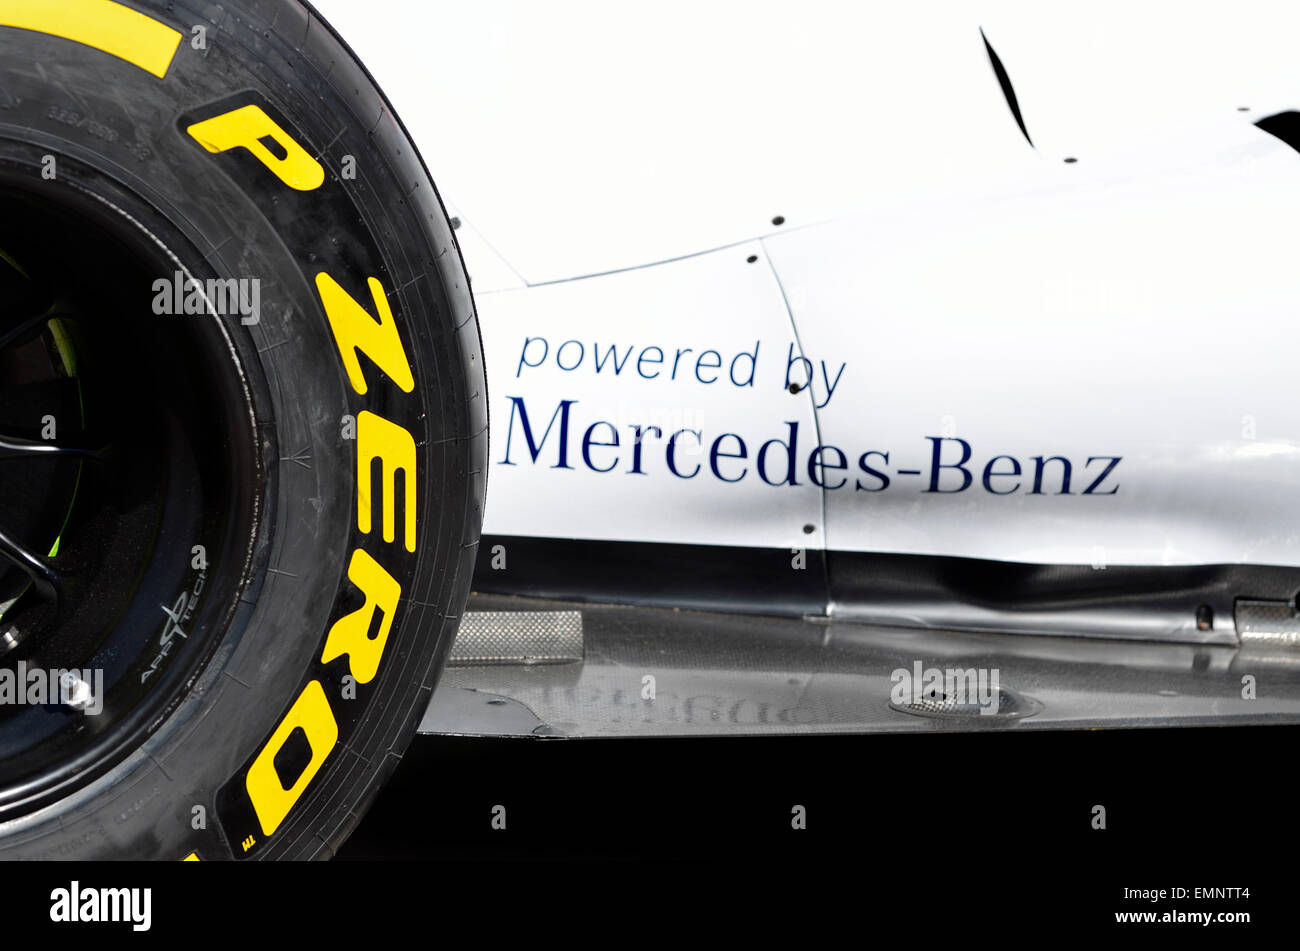 2014 Williams Formula One car - Pirelli P Zero tyre and 'Powered by Mercedes-Benz' Stock Photo